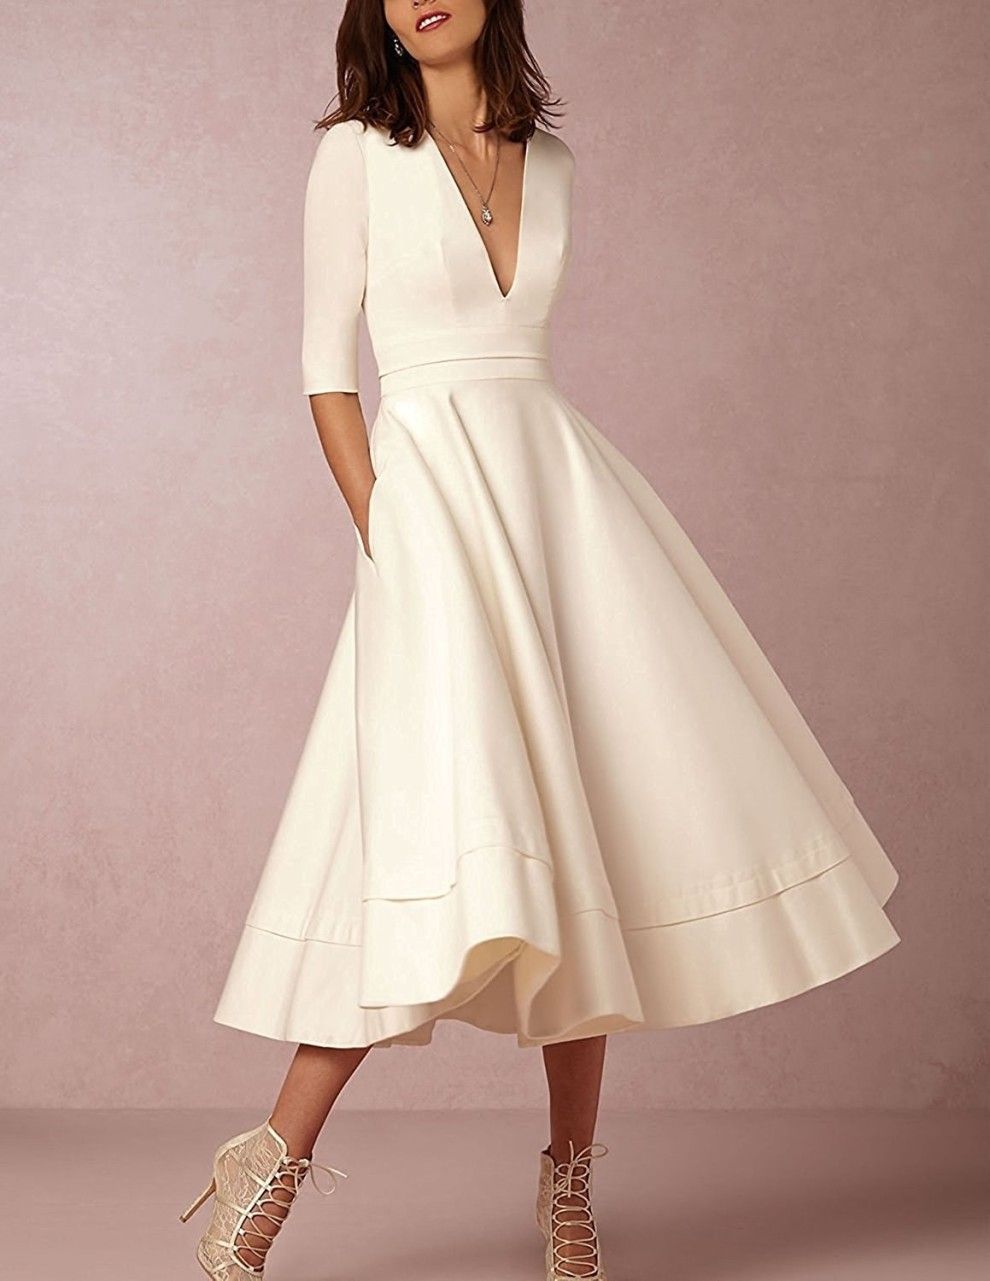 Chic Day Dresses for Effortless Style